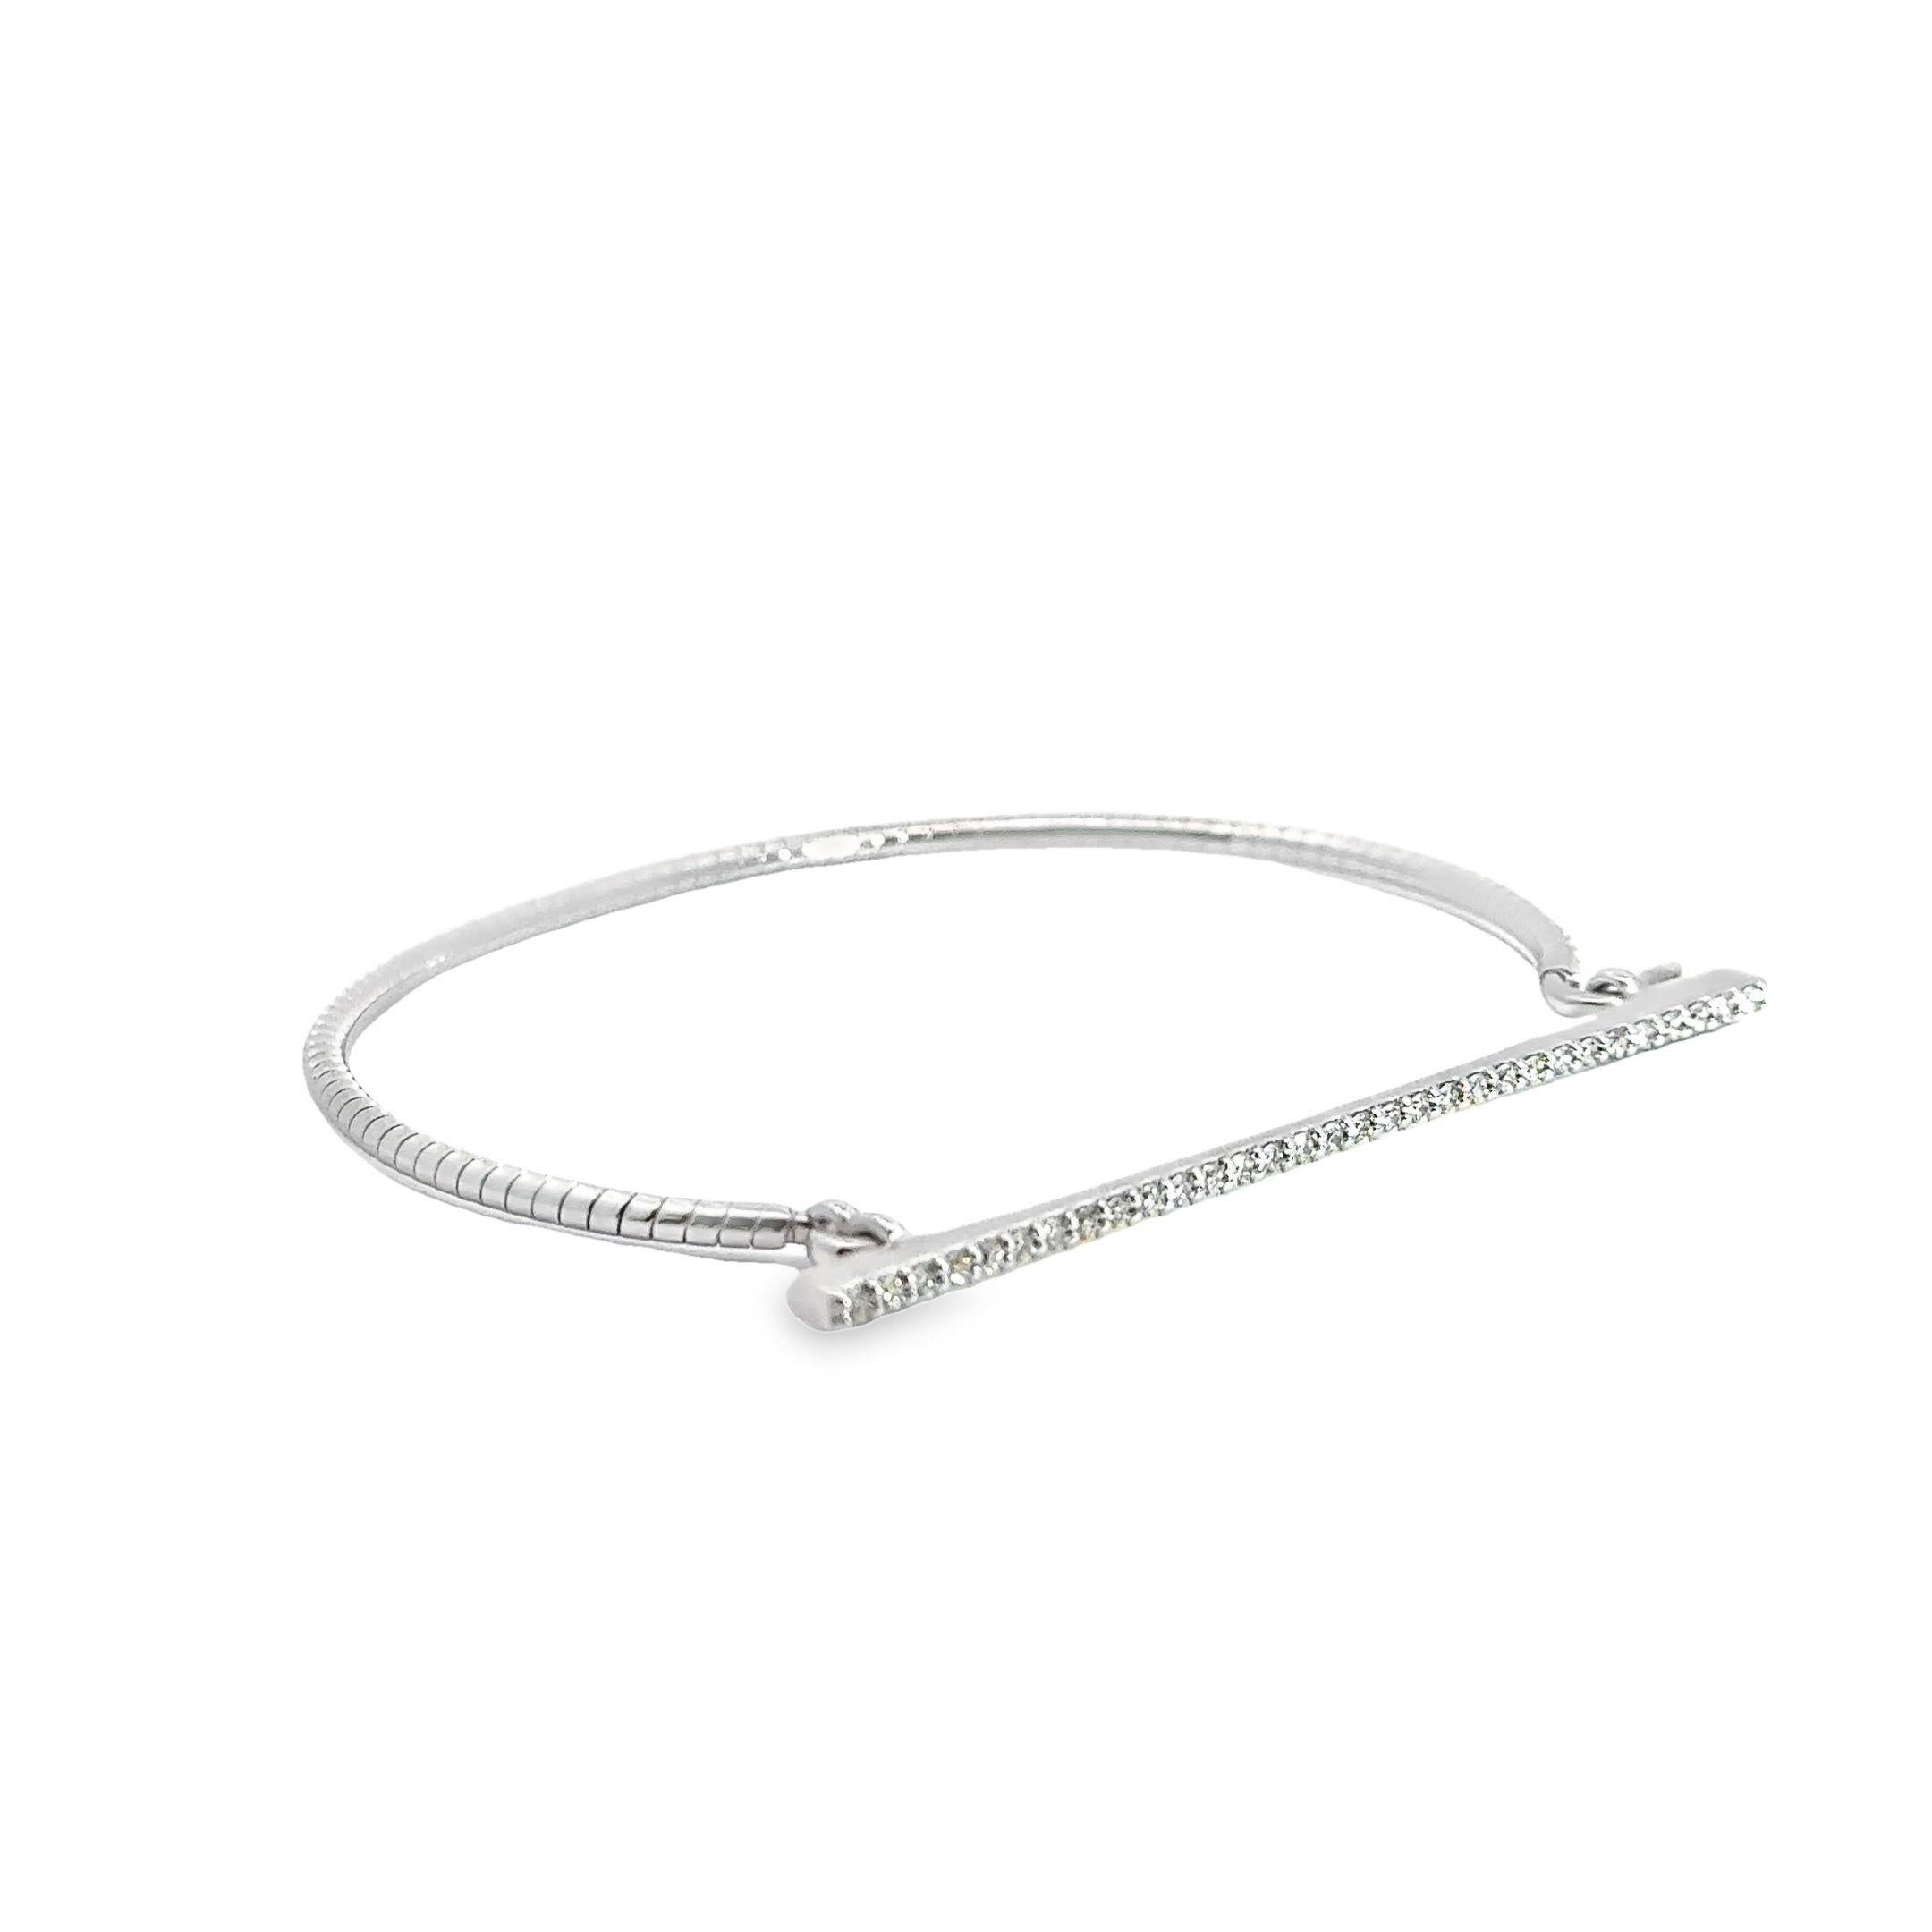 Grace your wrist with this finely crafted work of jewelery art. Crafted from the rarest of 18 karat white gold, this bangle has been meticulously designed into a timeless and elegant silhouette. Wrapping your wrist in luxury, the white gold gleams